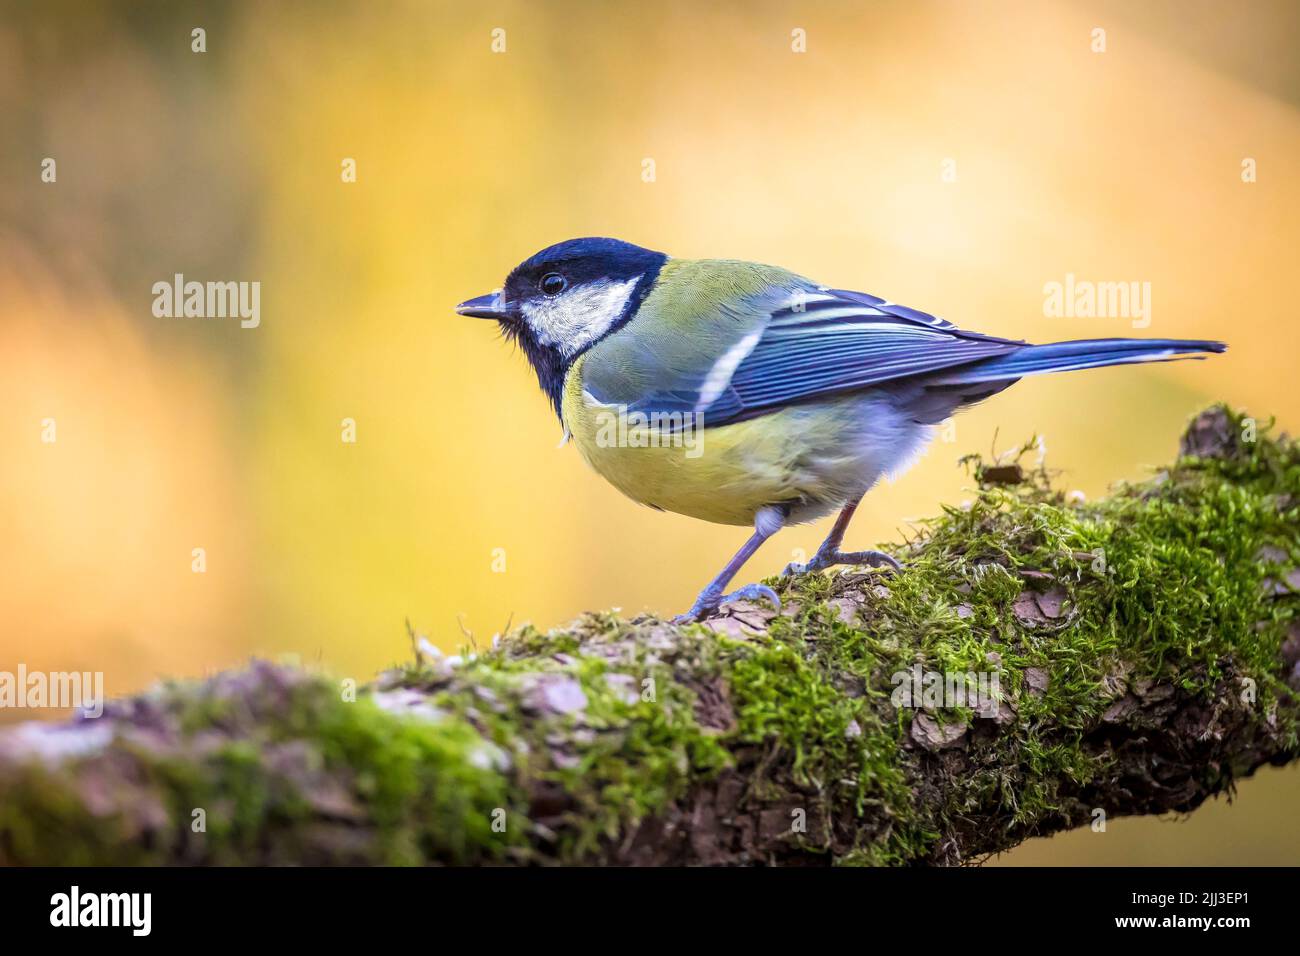 Closeup portrait of a Great tit bird, Parus Major, perched on wood in bright sunlight Stock Photo